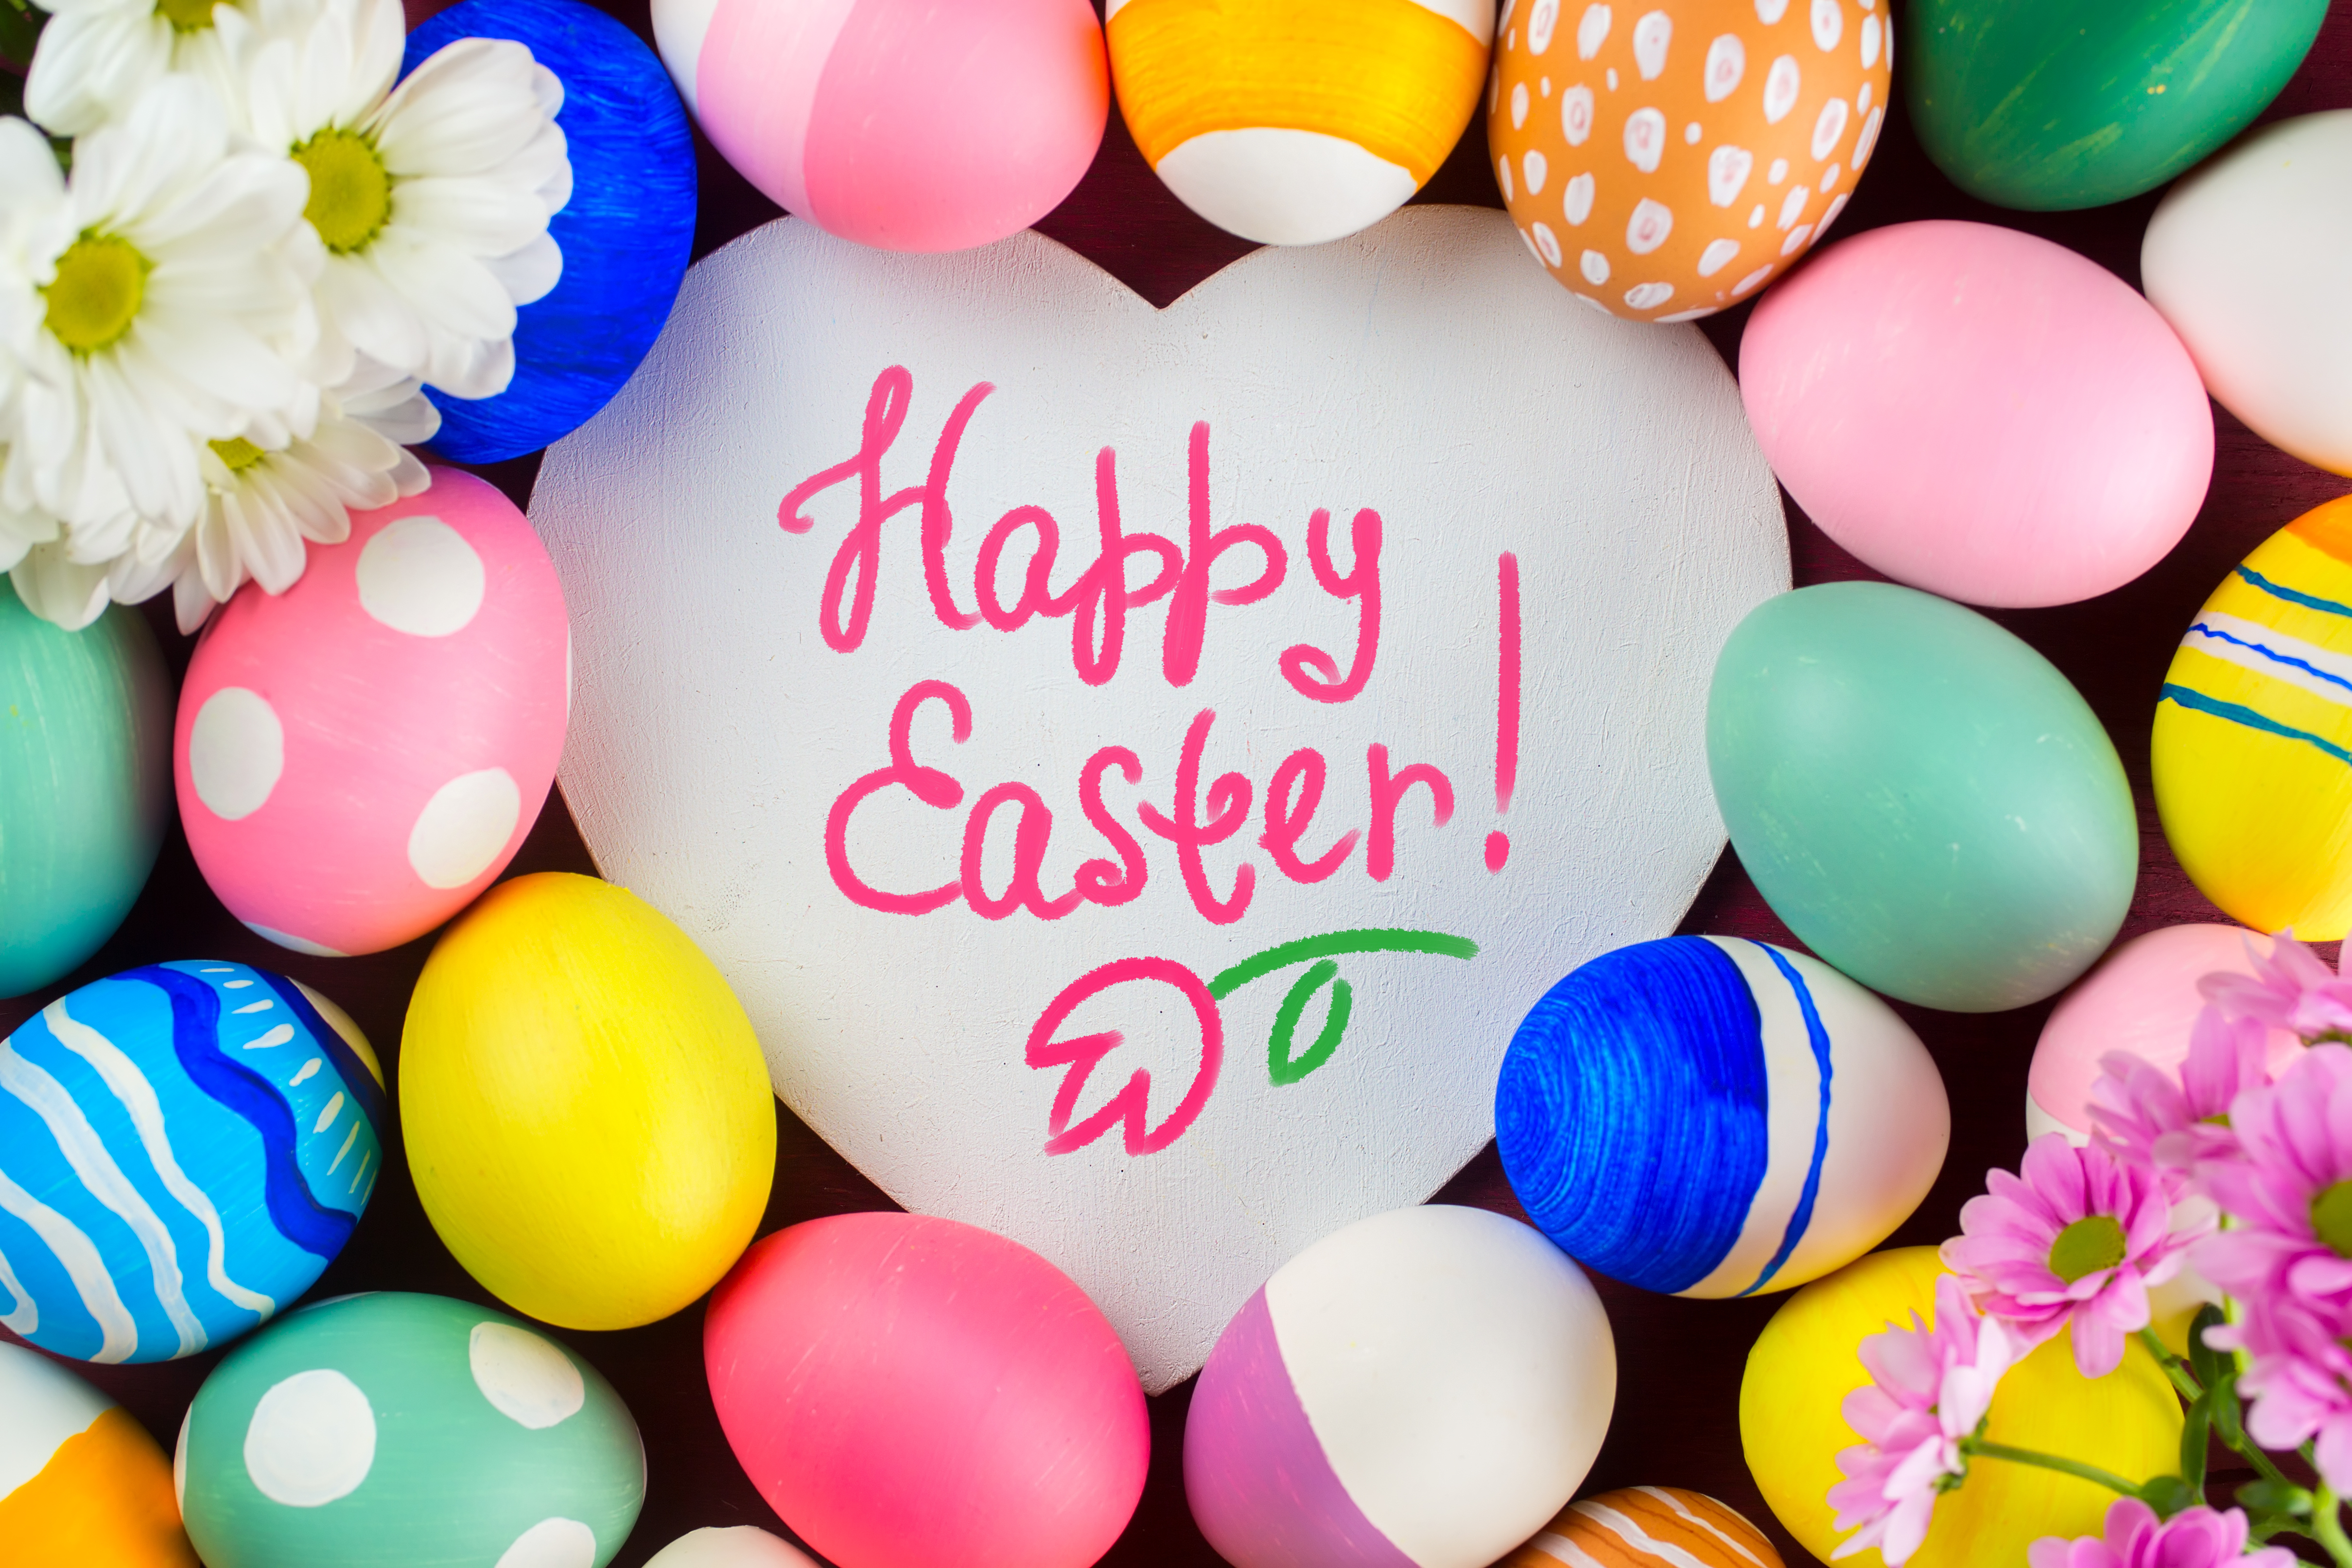 easter, holiday, chrysanthemum, colorful, colors, easter egg, egg, happy easter